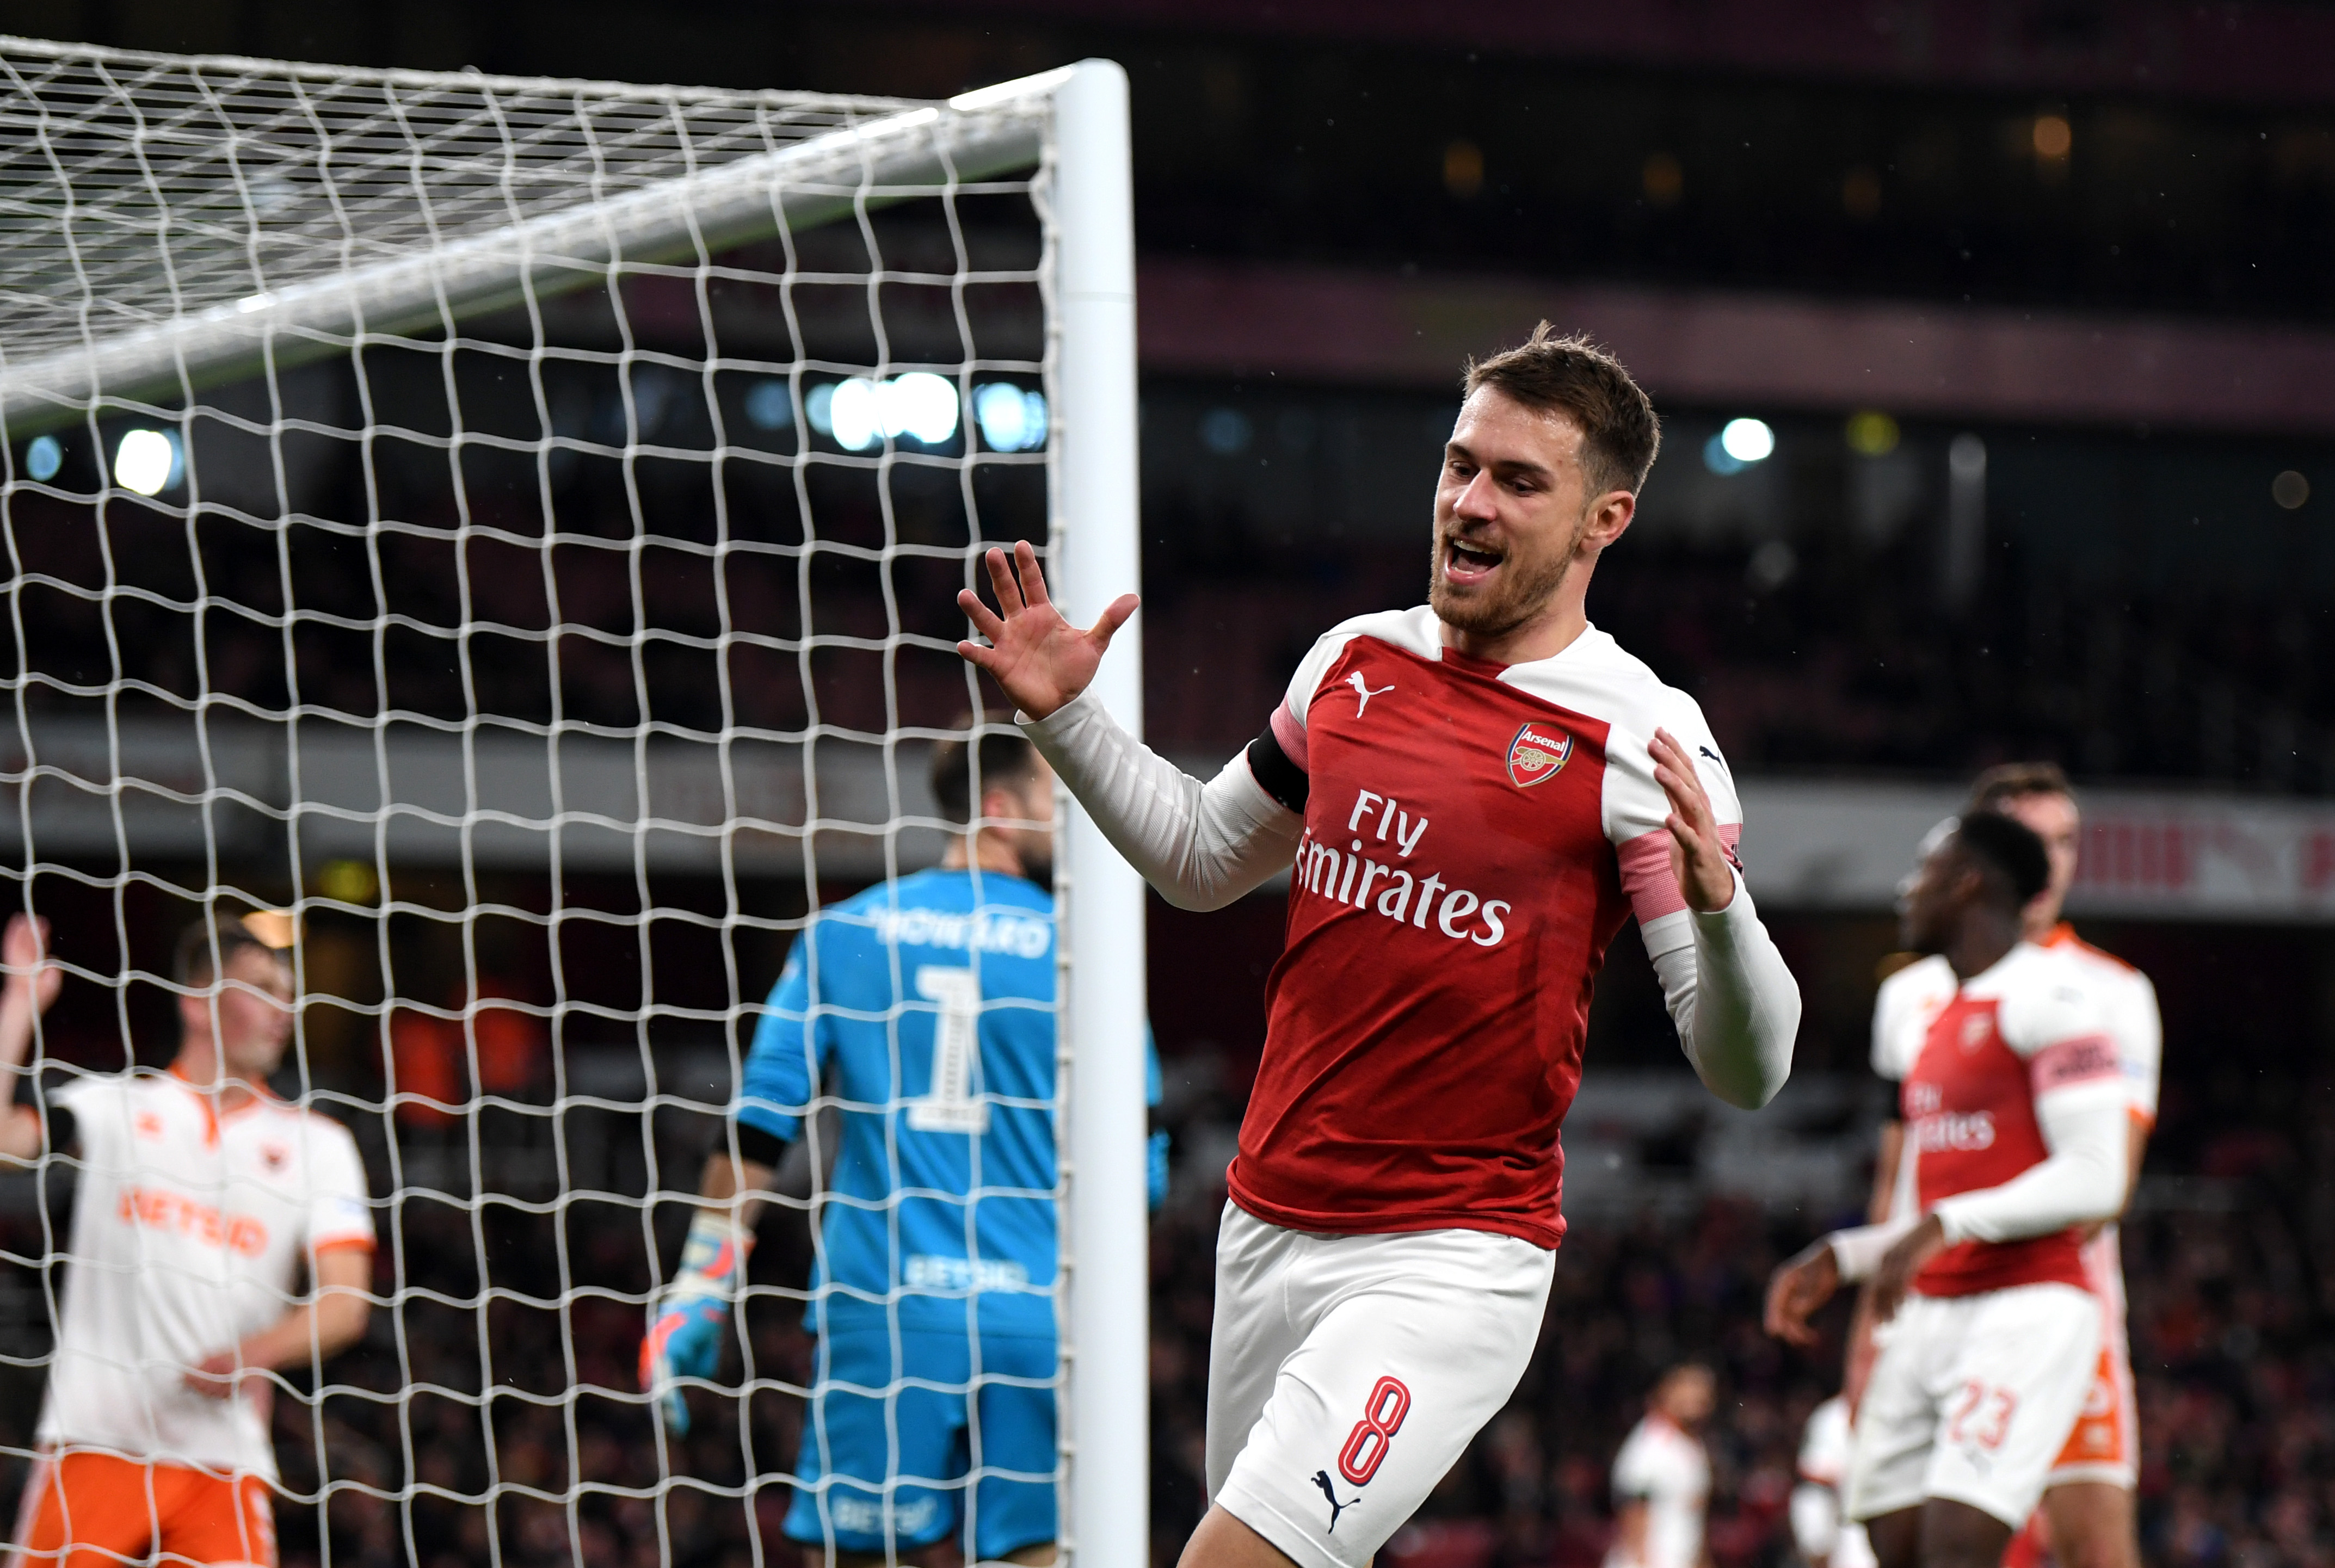 Arsenal's main concern is to replace Aaron Ramsey, who will likely leave the club. (Photo by Shaun Botterill/Getty Images)